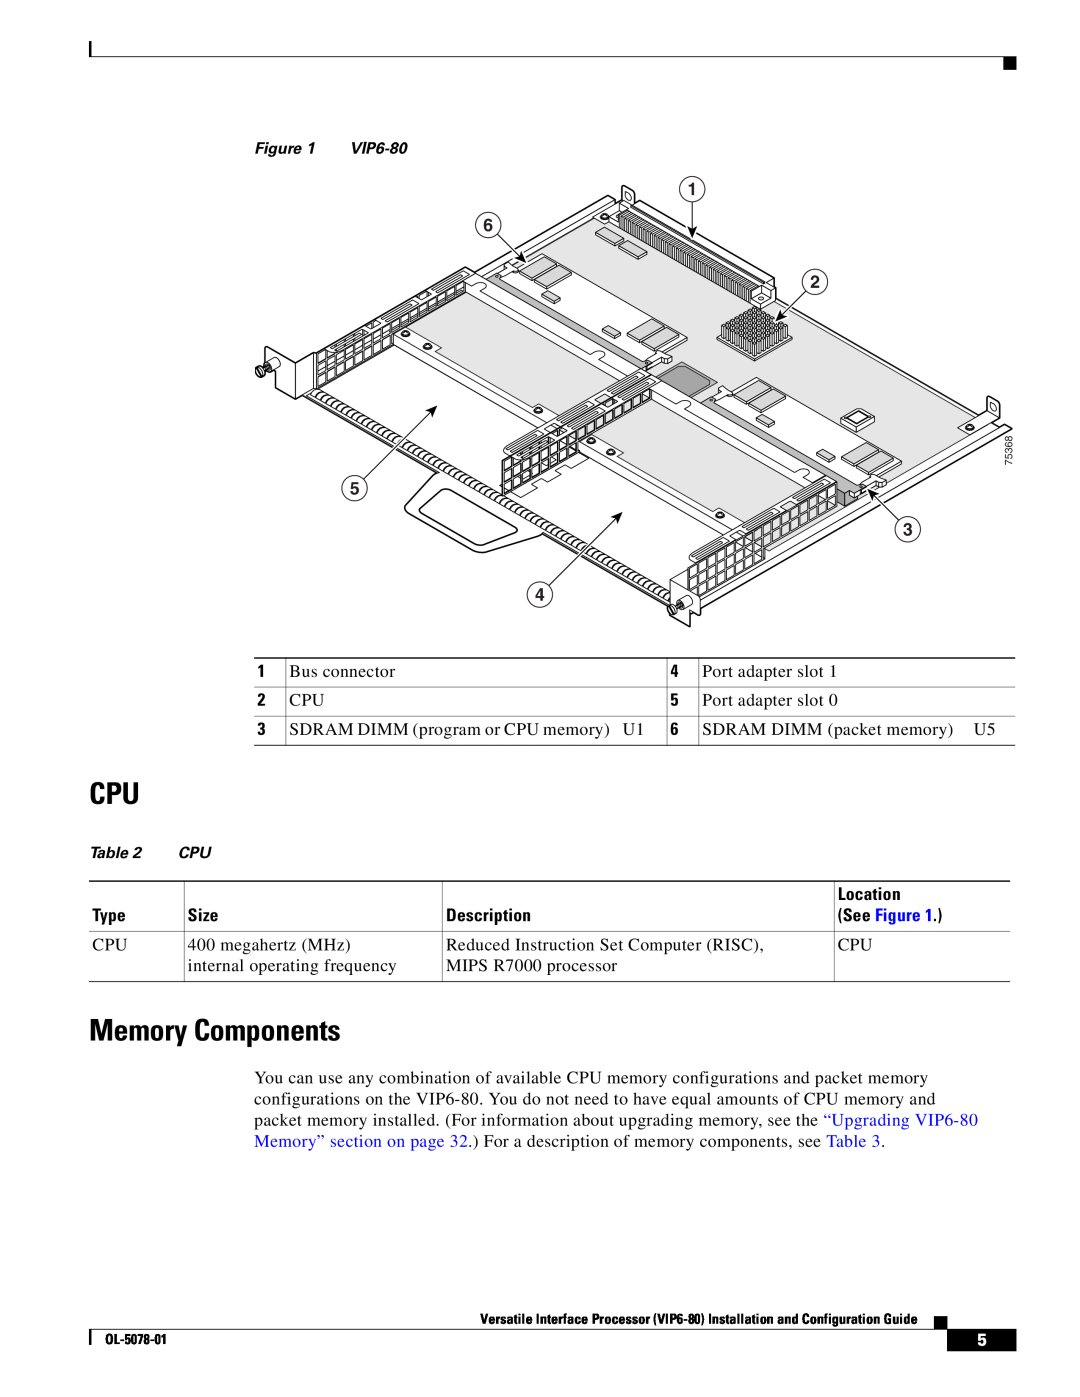 Cisco Systems (VIP6-80) manual Memory Components, Location, Type, Size, Description, See Figure 